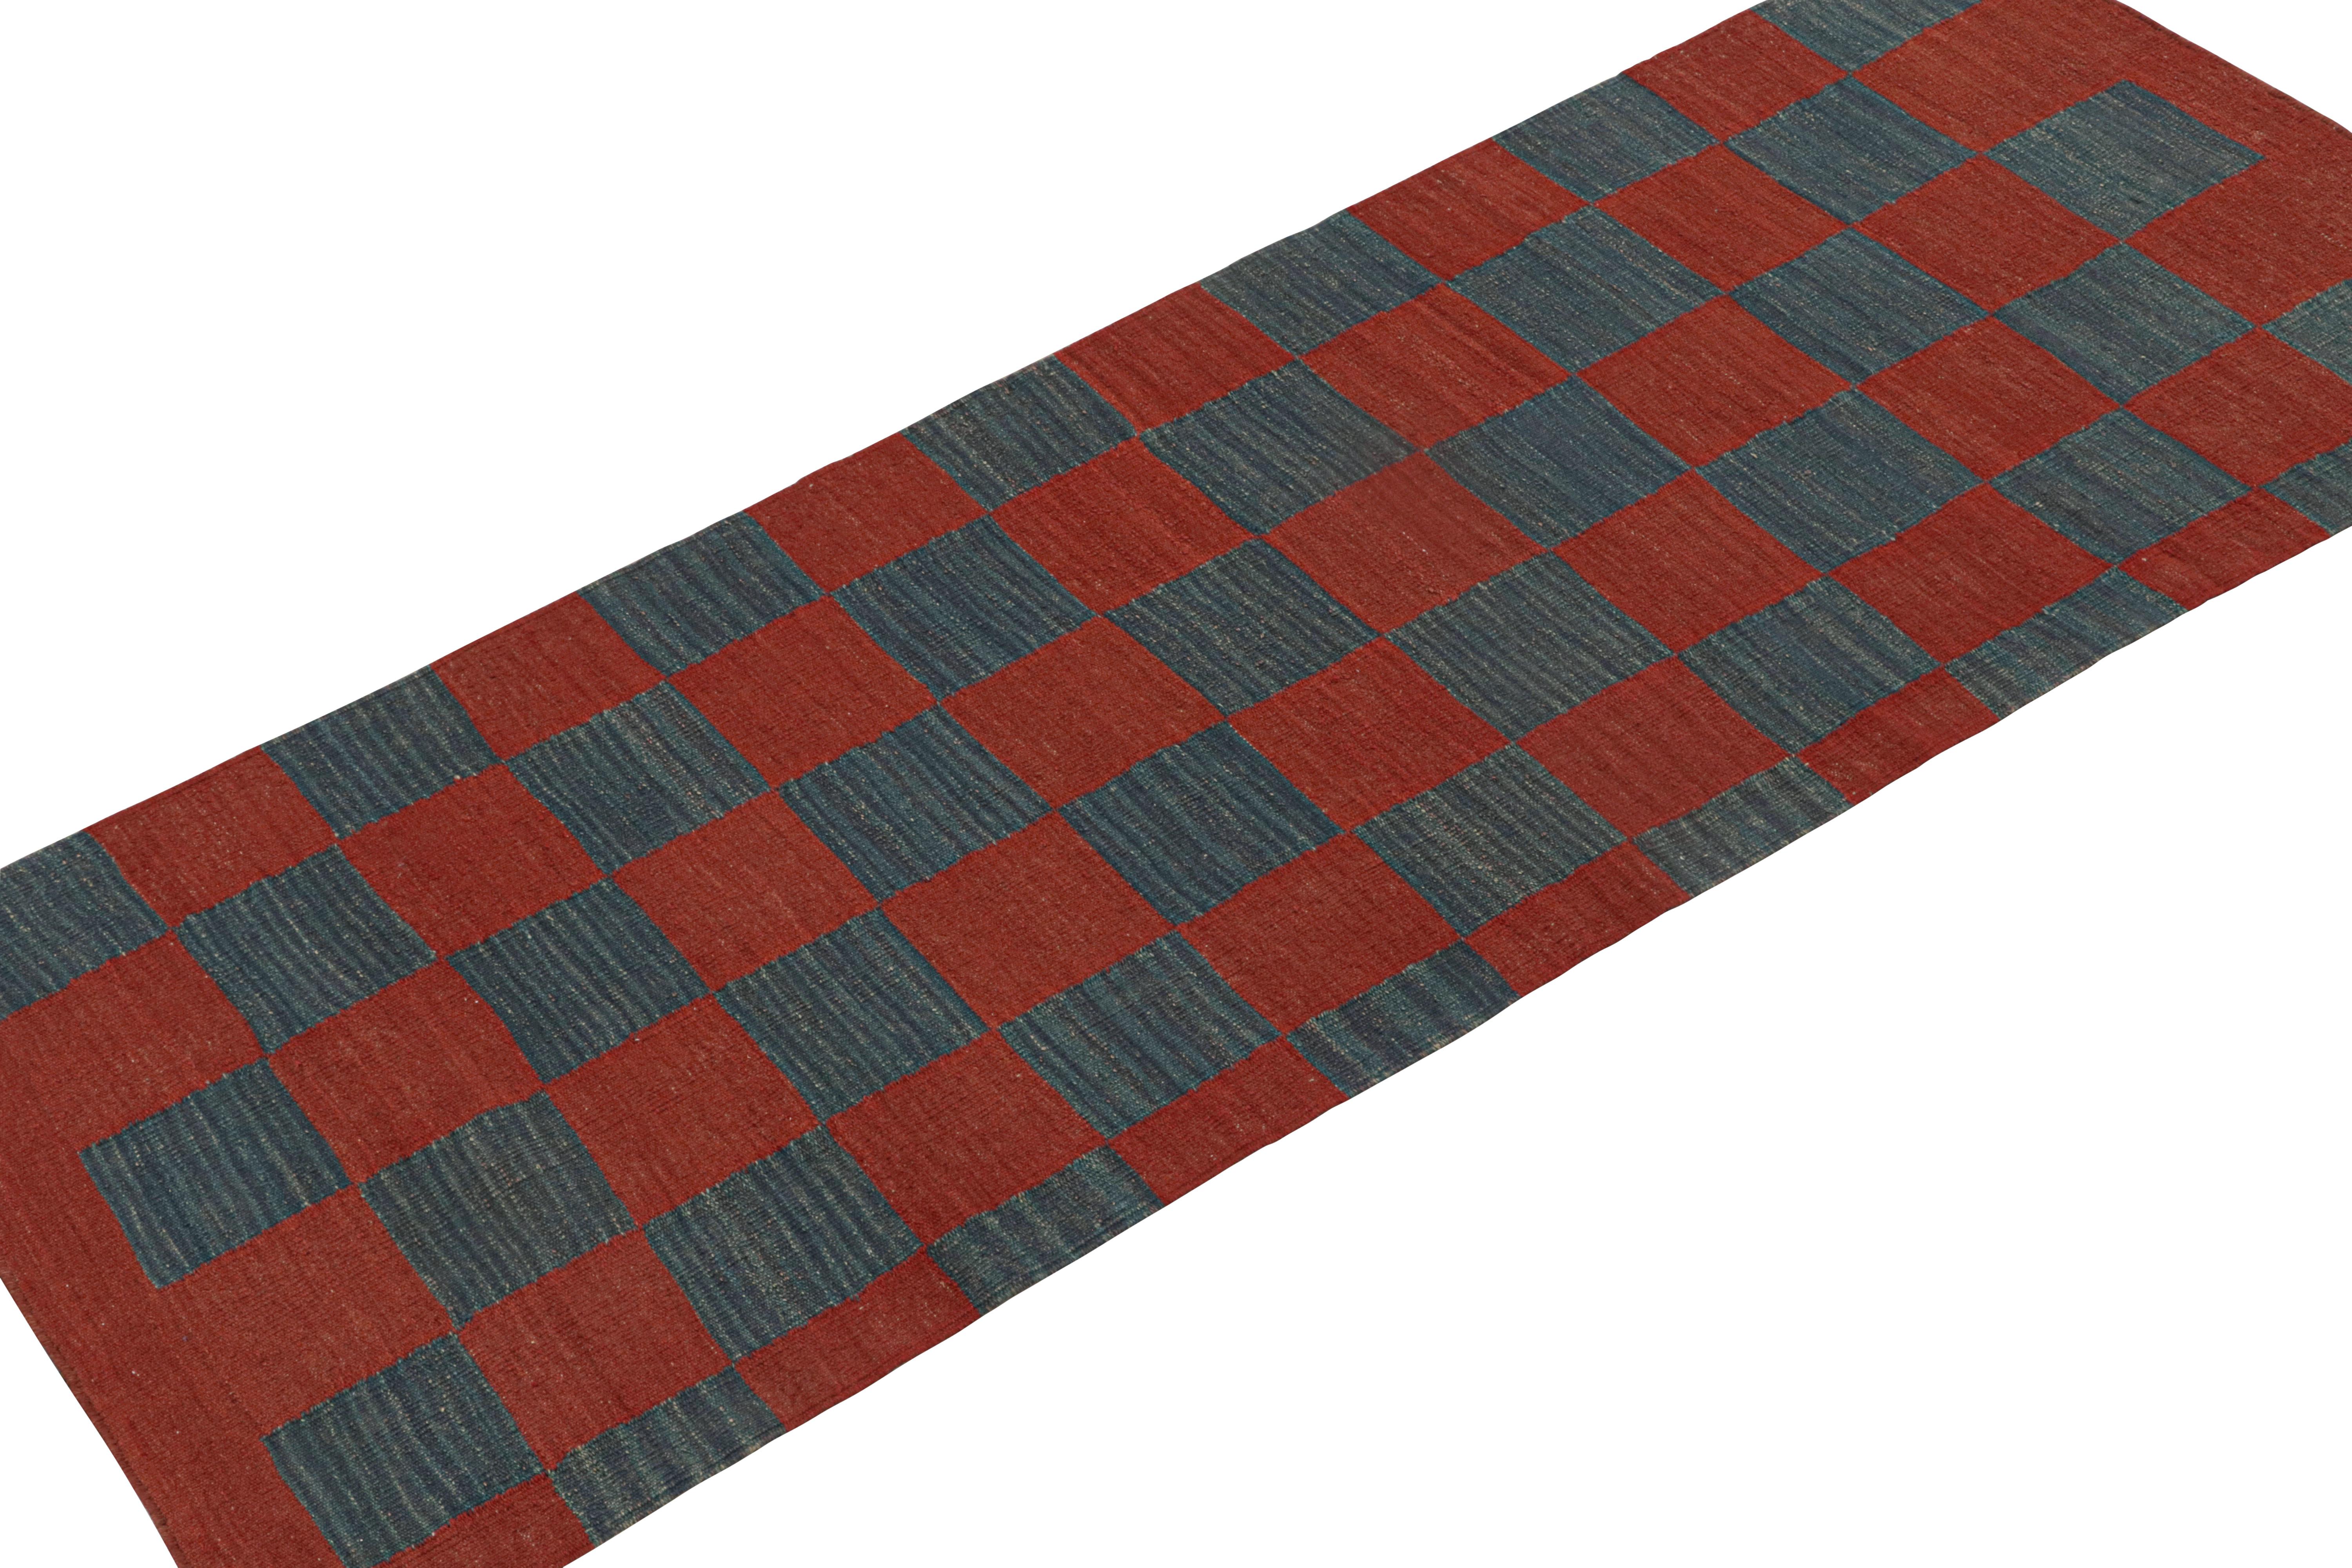 Tribal Vintage Persian Kilim Runner in Red & Blue Checkerboard Pattern by Rug & Kilim For Sale